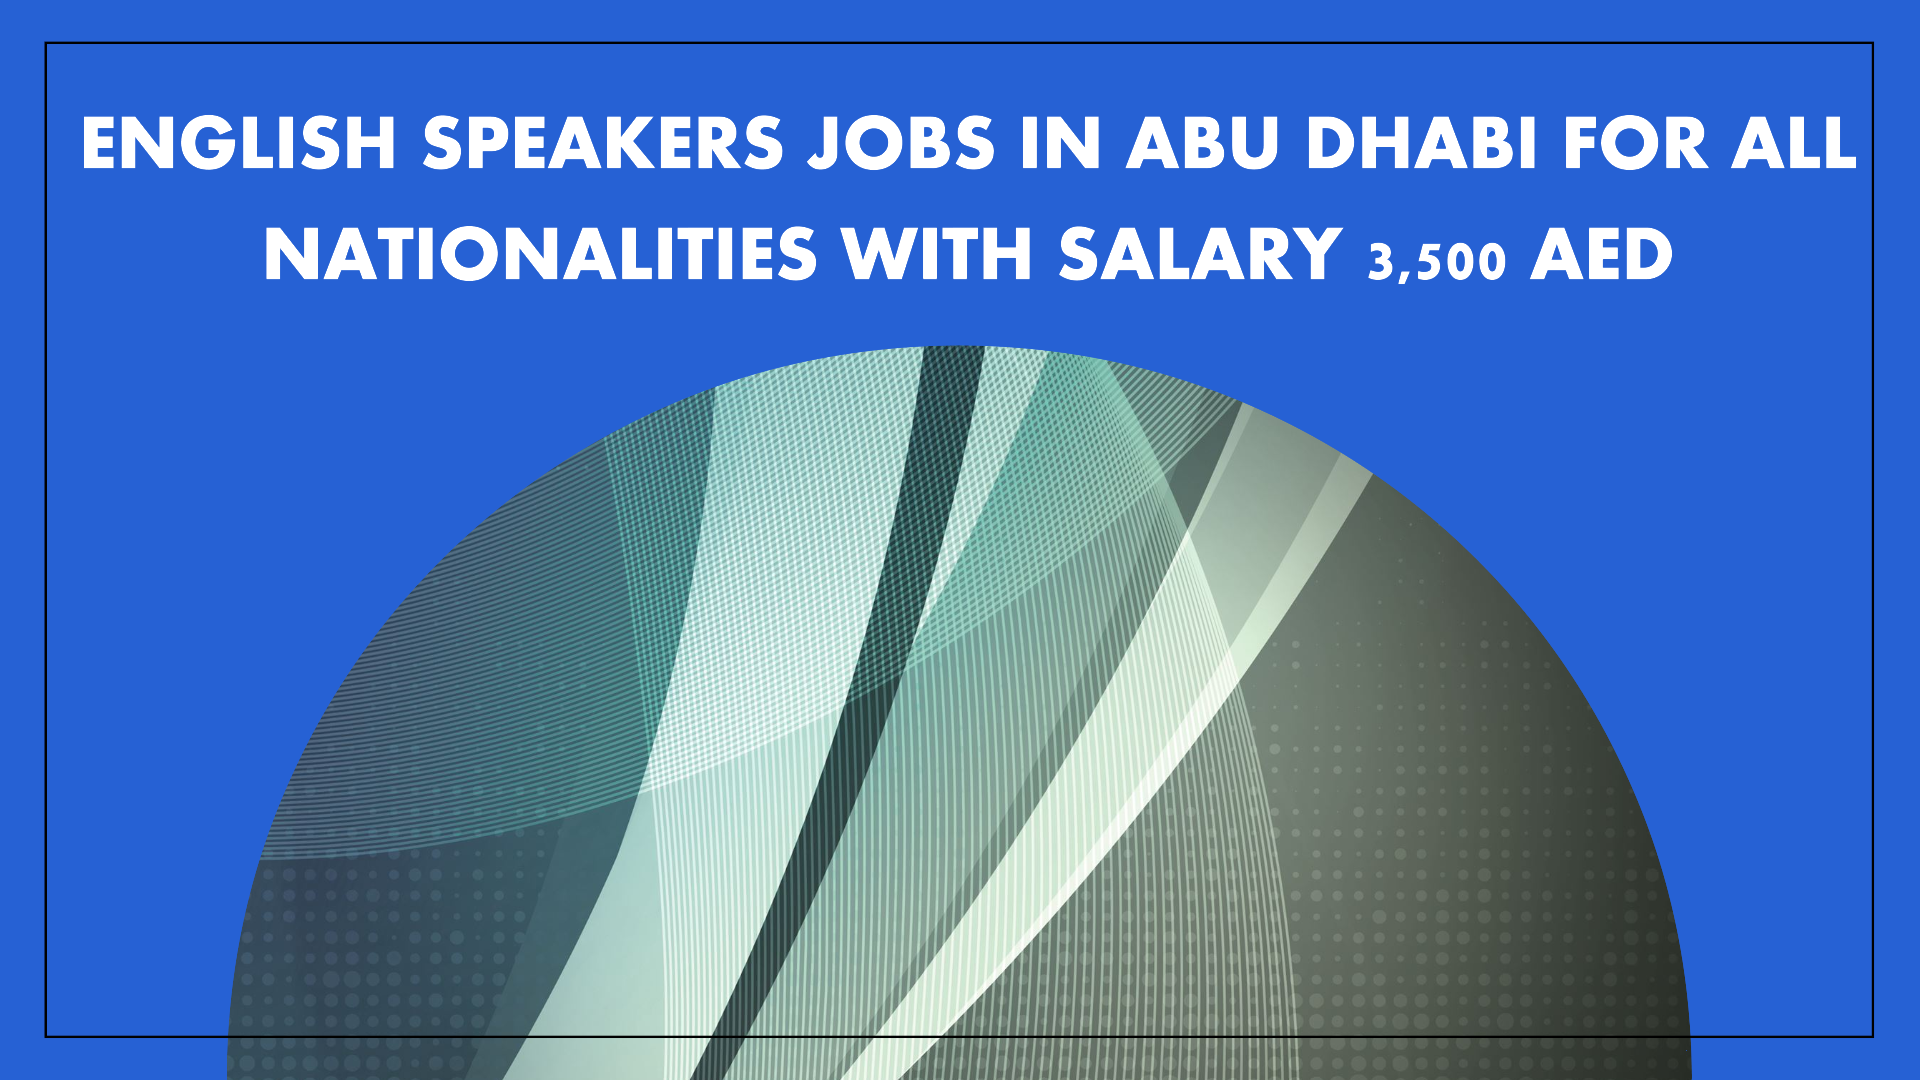 english speakers jobs in abu dhabi for all nationalities with salary 3,500 AED